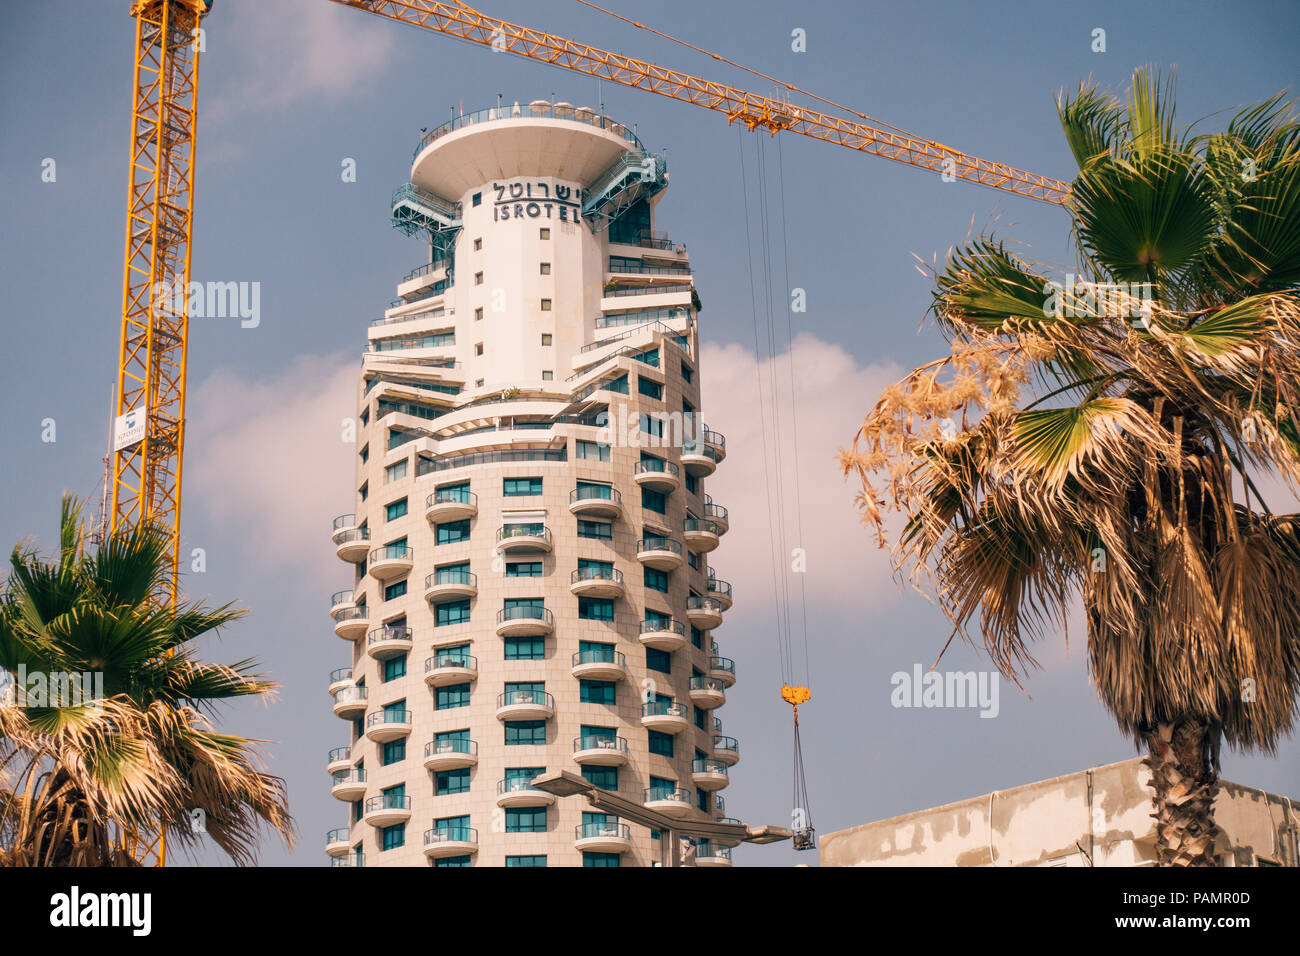 the Isrotel hotel tower building with a crane and palm trees in the foreground in Tel Aviv, Israel Stock Photo